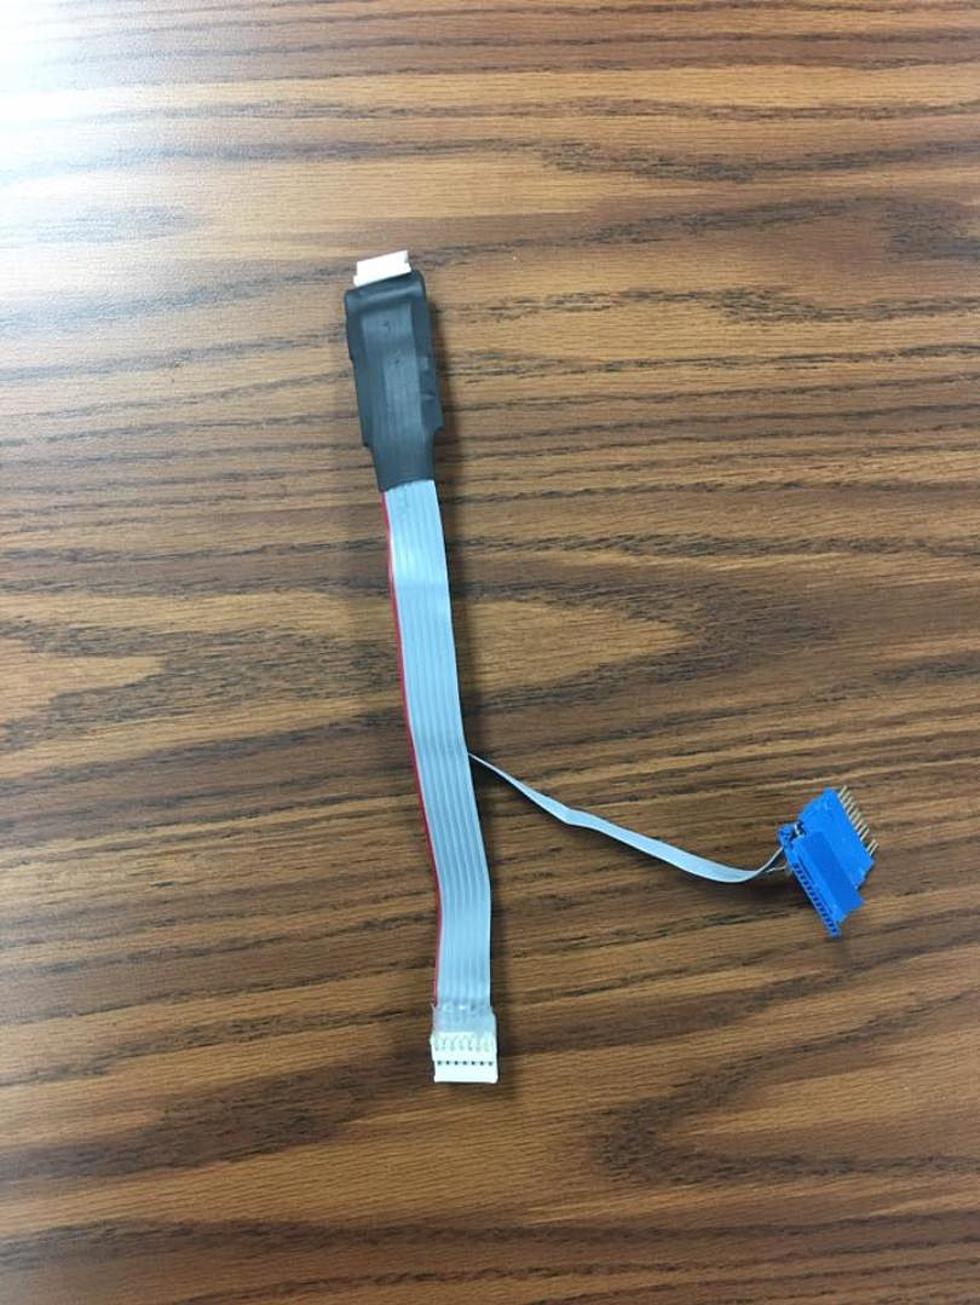 Credit Card Skimming Device Discovered in McGregor Gas Pump